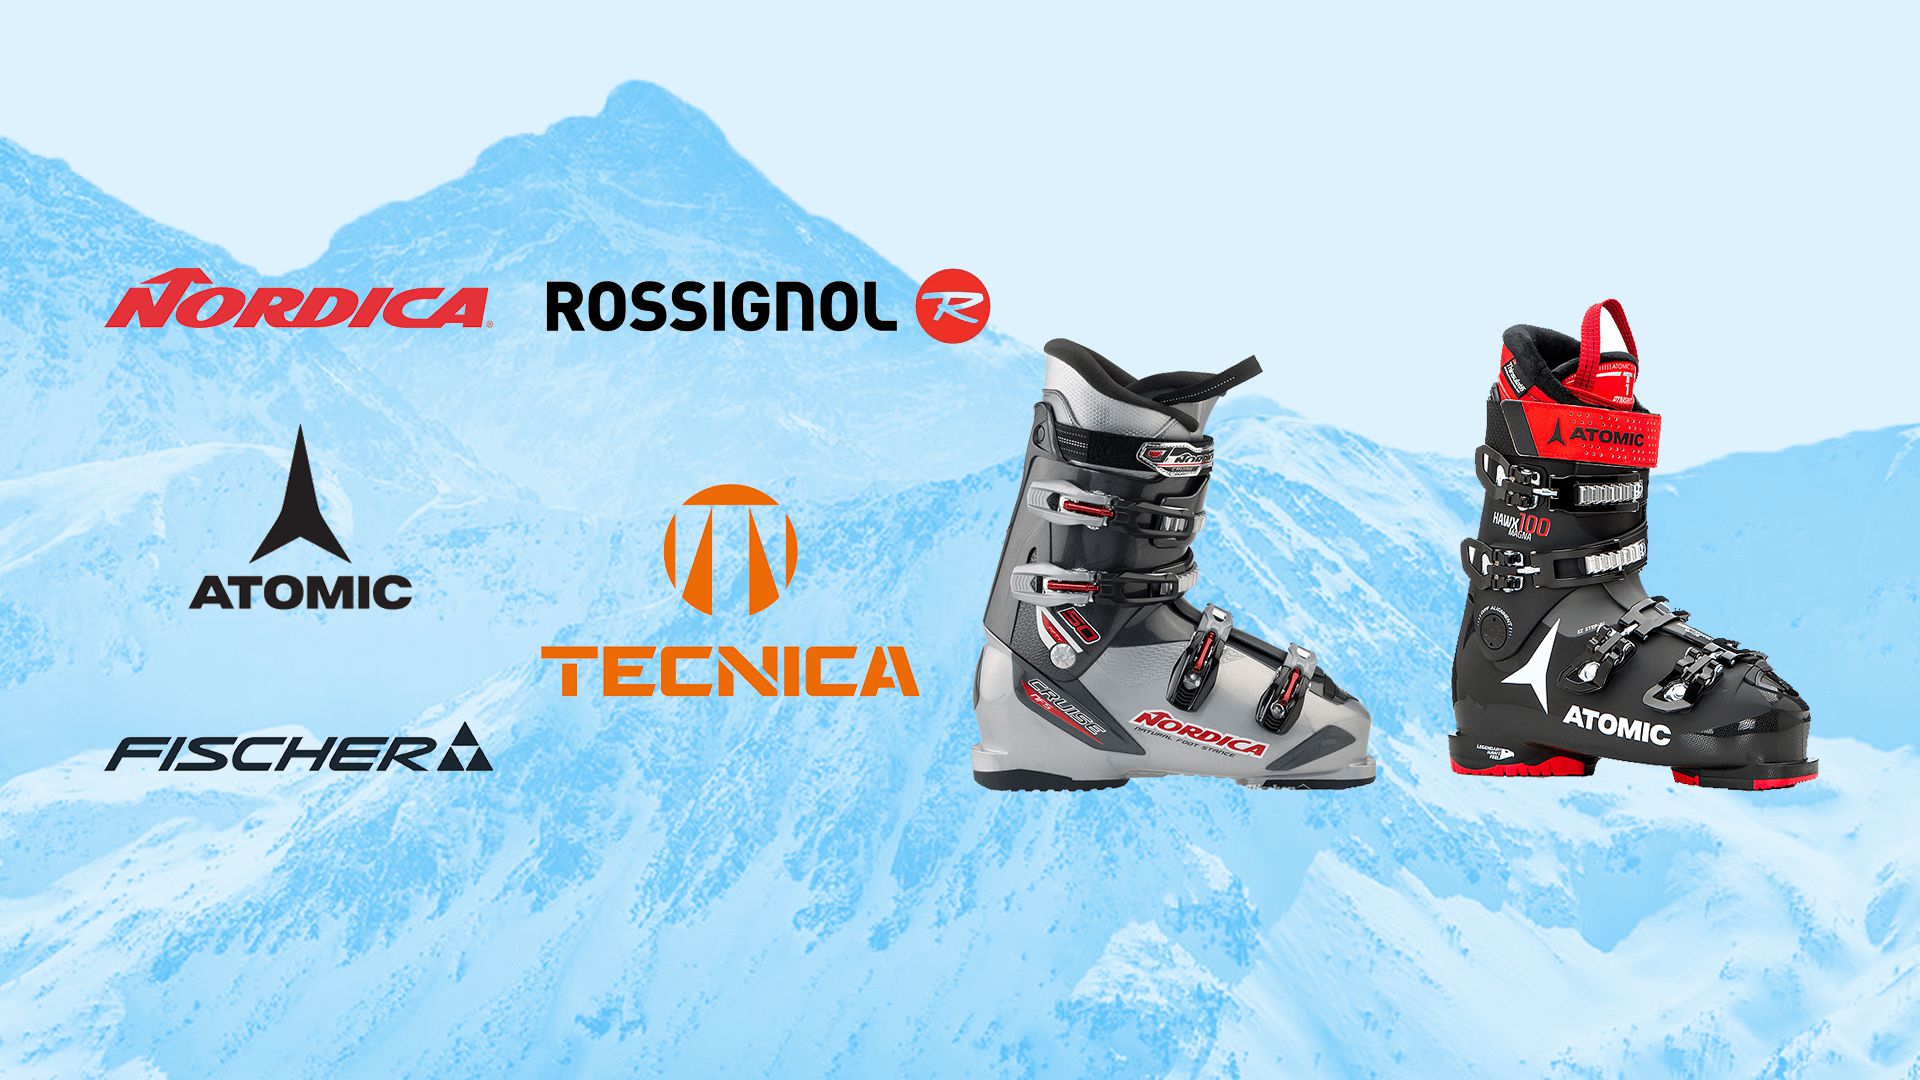 An illustration that shows brand logos, a gray and black Nordica ski boot, and a red, white, and black Atomic ski boot against a snowy blue mountain in the background Nordica logo, Rossignol logo, Atomic logo, Technica logo, Fisher logo.